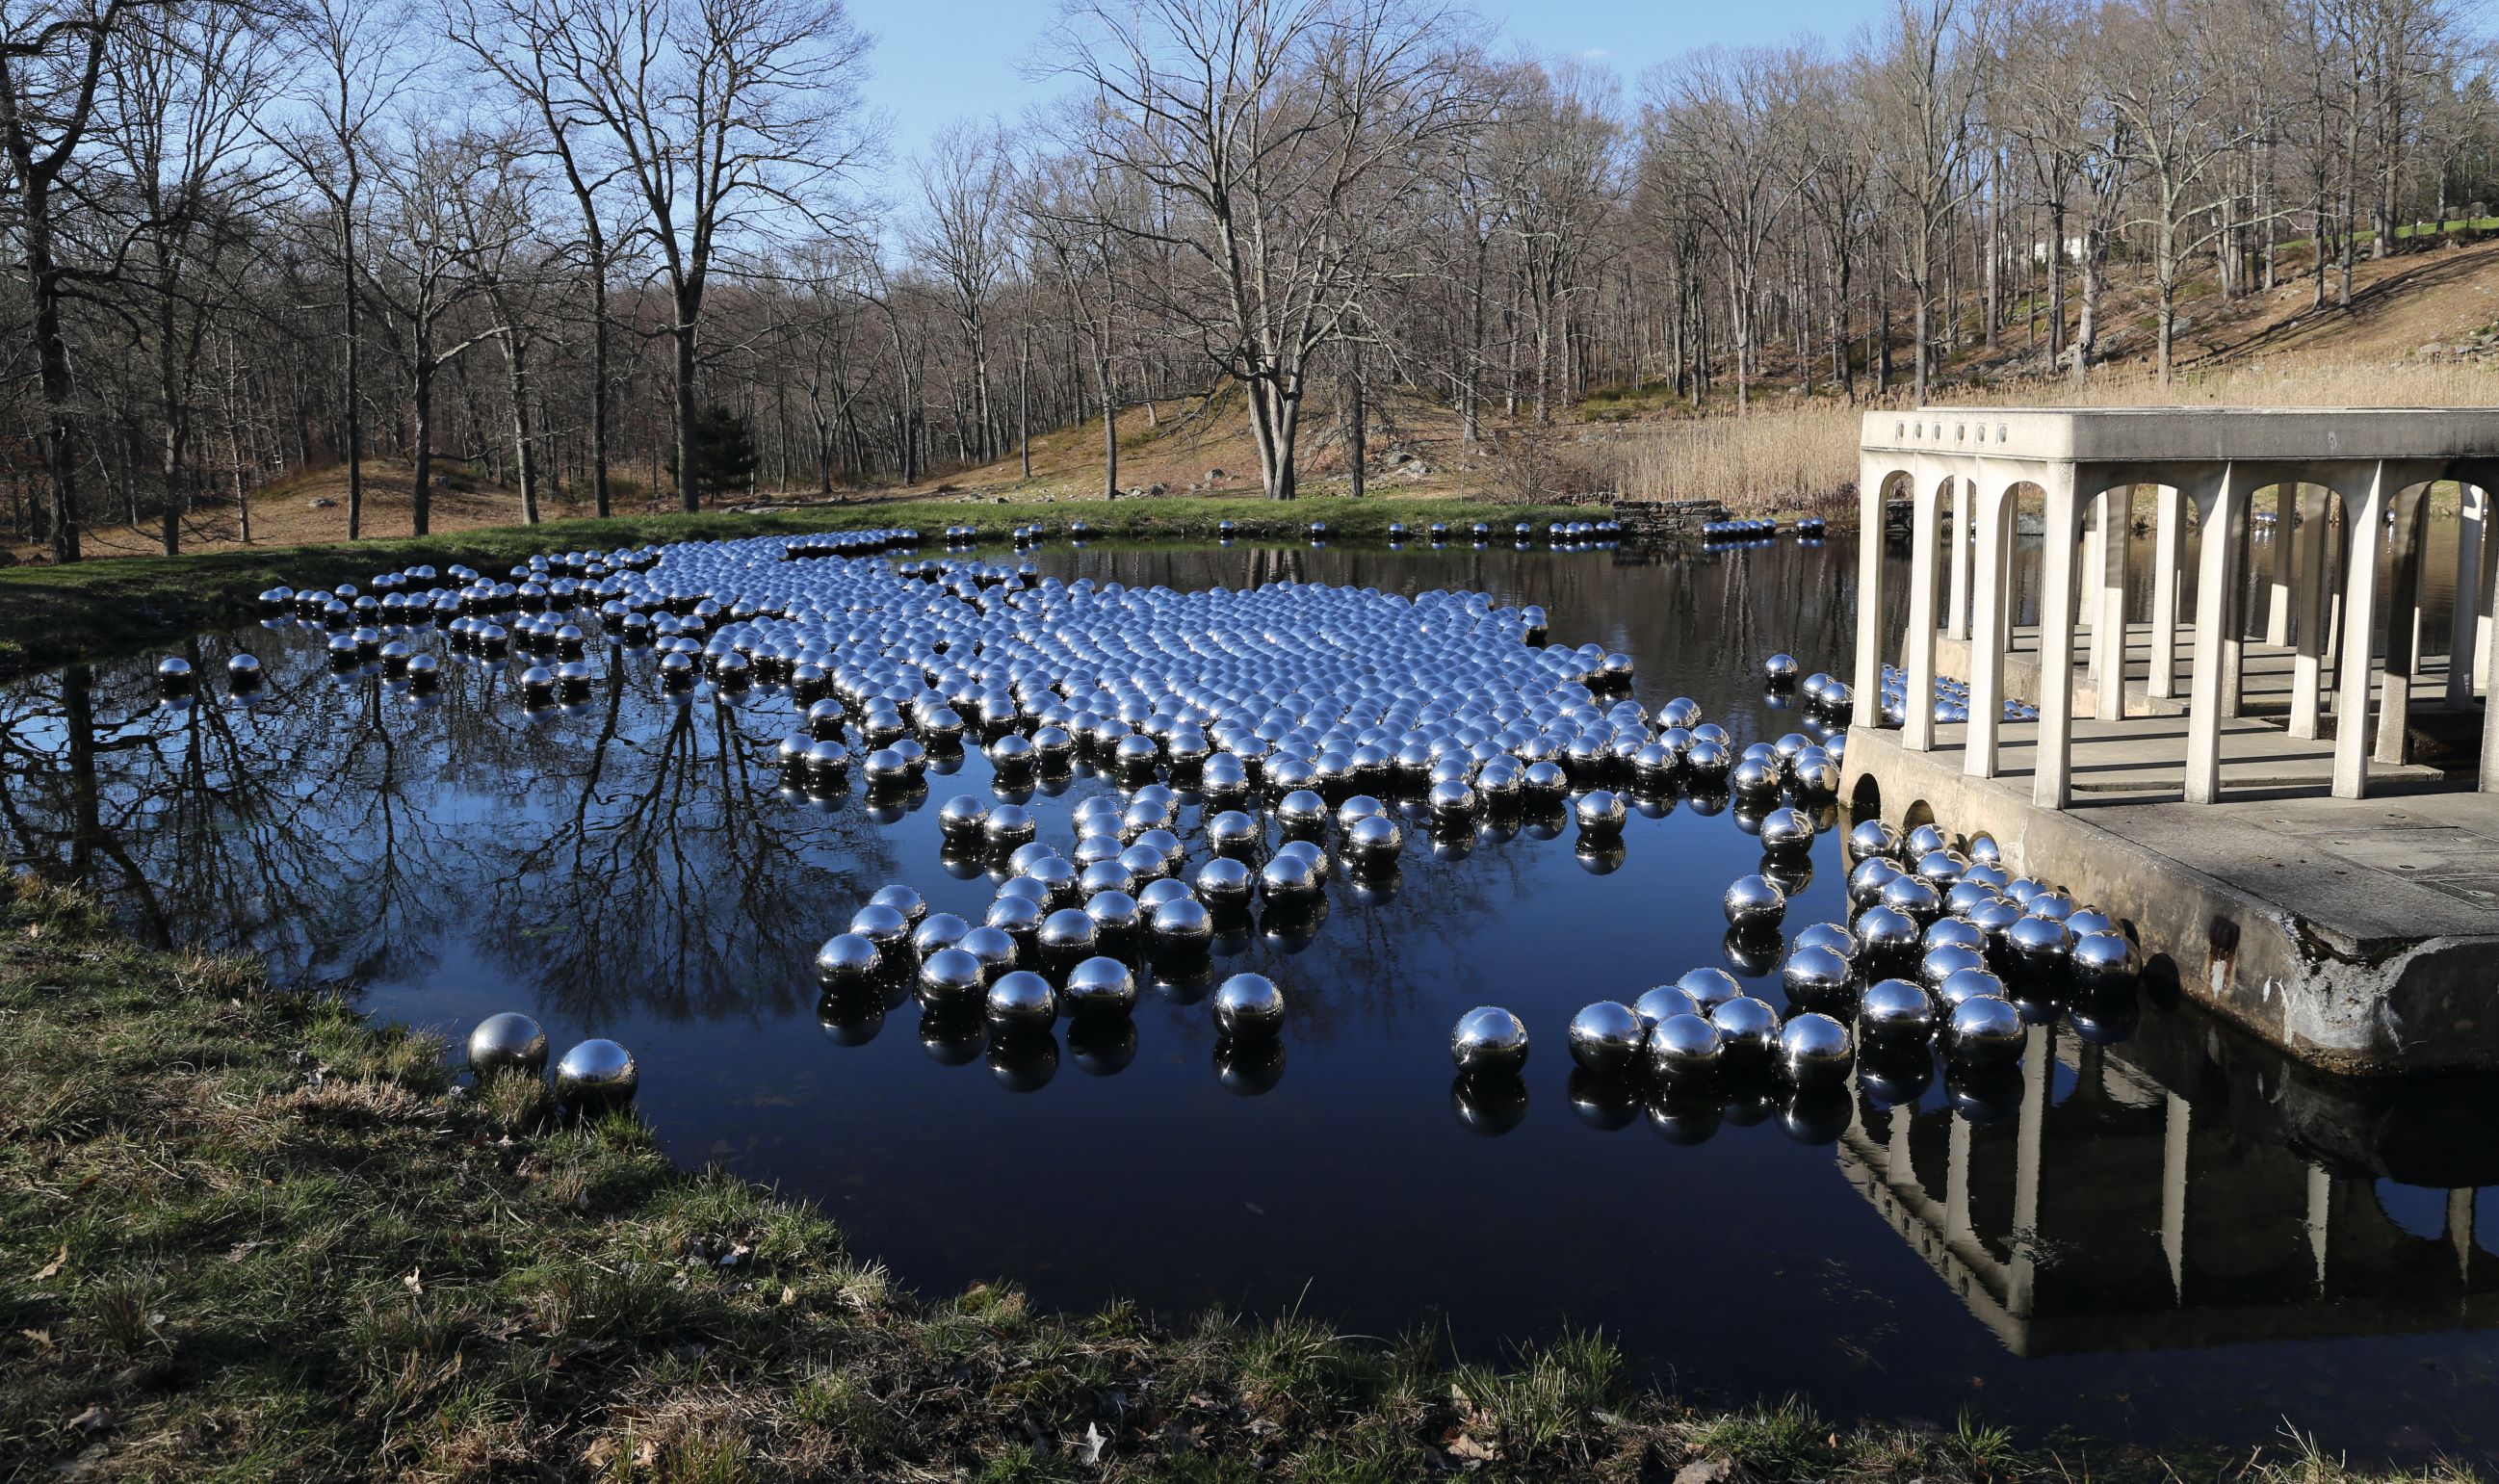 Yayoi Kusama, Narcissus Garden, 2016, stainless mirror balls, each Ø 30 cm, installation view, Glass House, New Canaan, Connecticut.